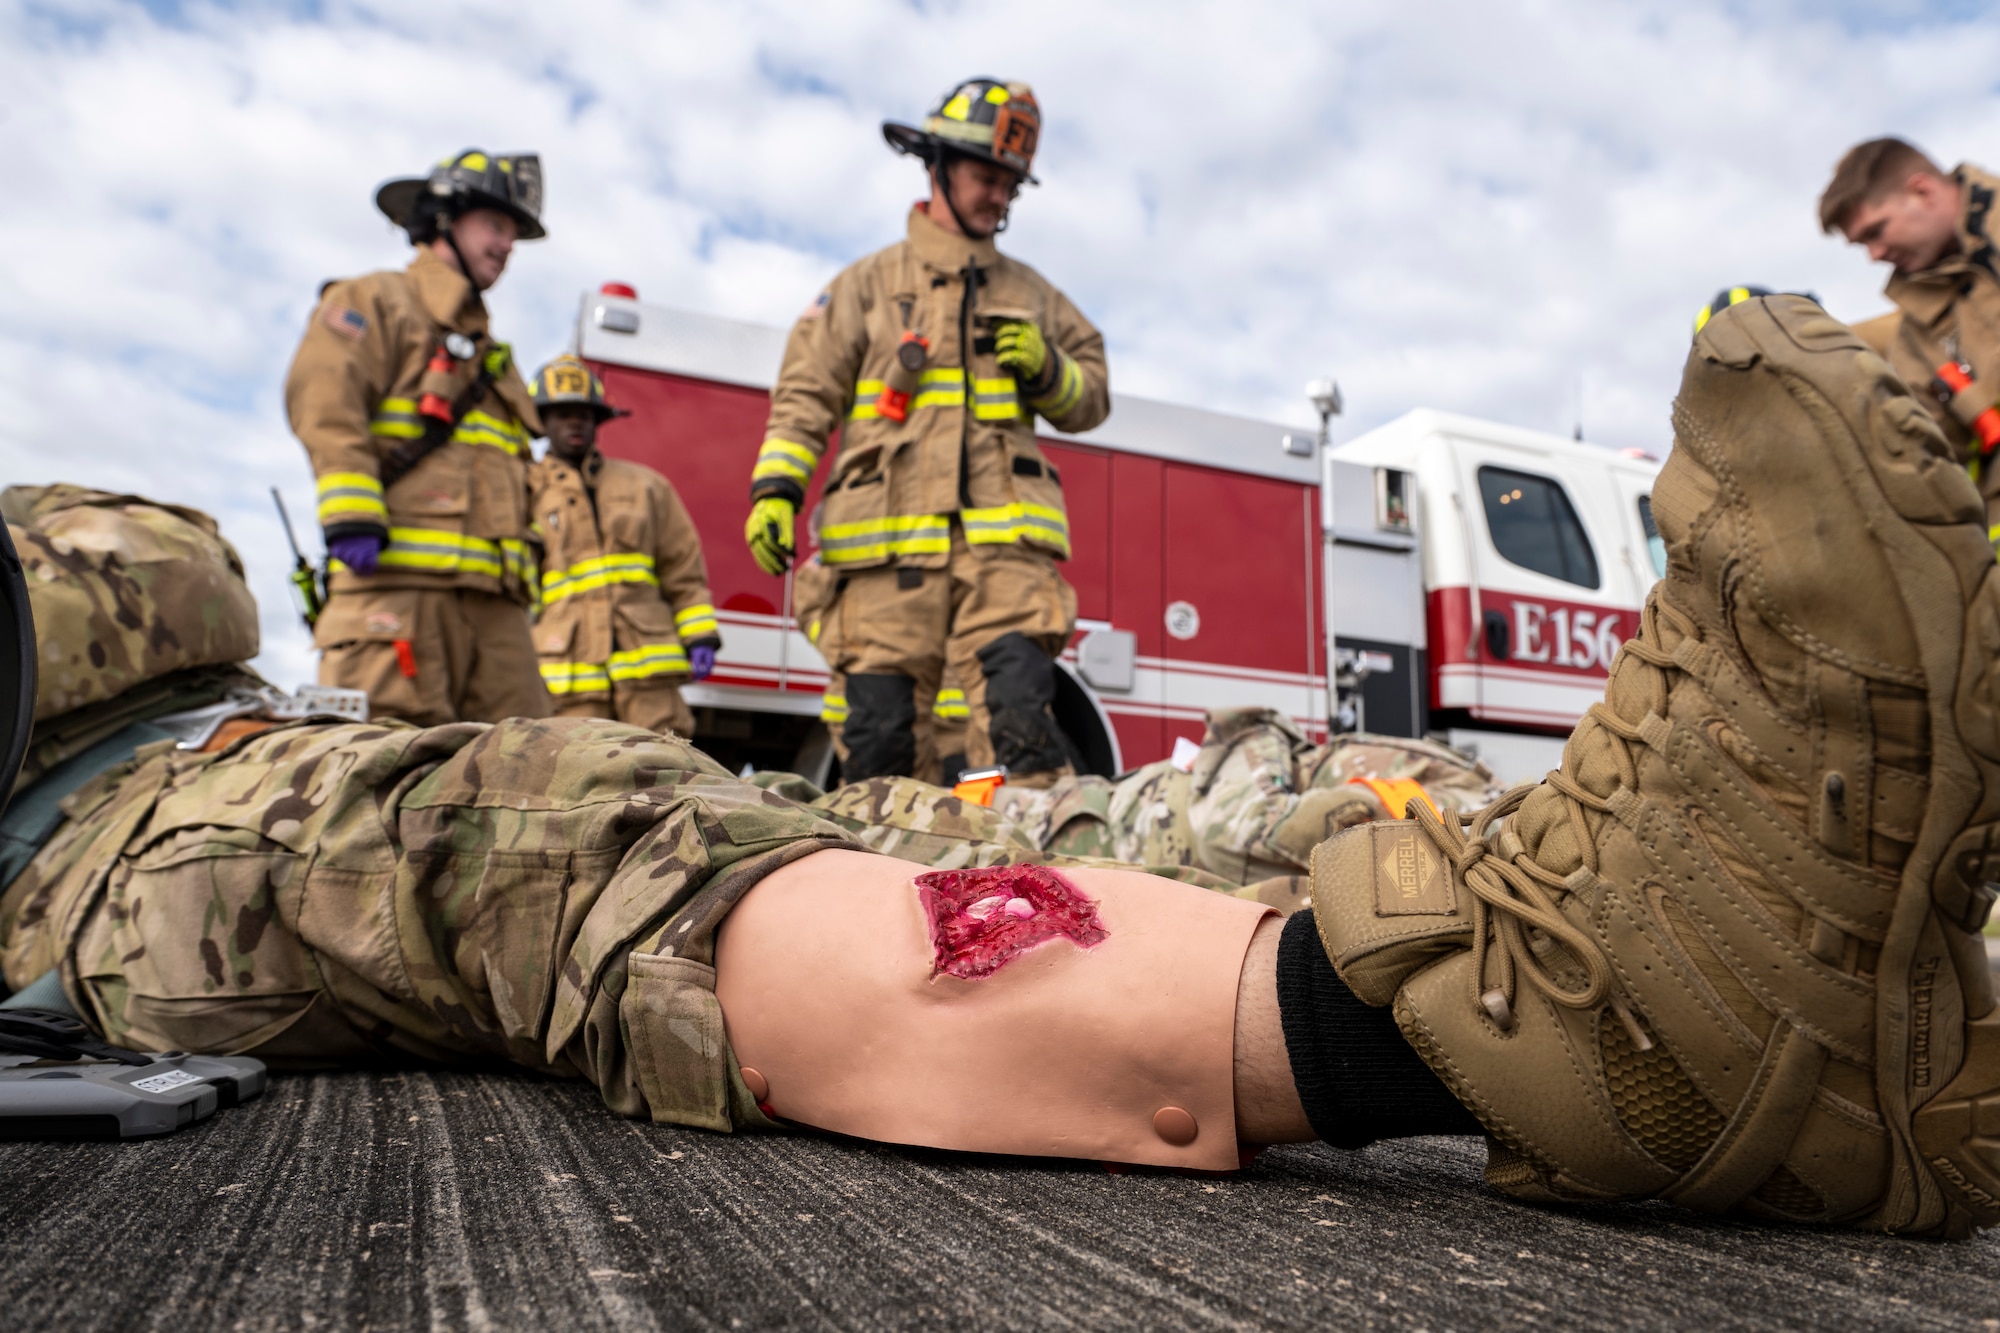 U.S. Air Force Airmen assigned to the 23rd Wing conduct an aircraft accident response exercise at Moody Air Force Base, Georgia, March 26, 2024. Firefighters triaged and monitored the simulated patients while waiting for the medical team to evaluate and transport patients. (U.S. Air Force photo by Senior Airman Deanna Muir)